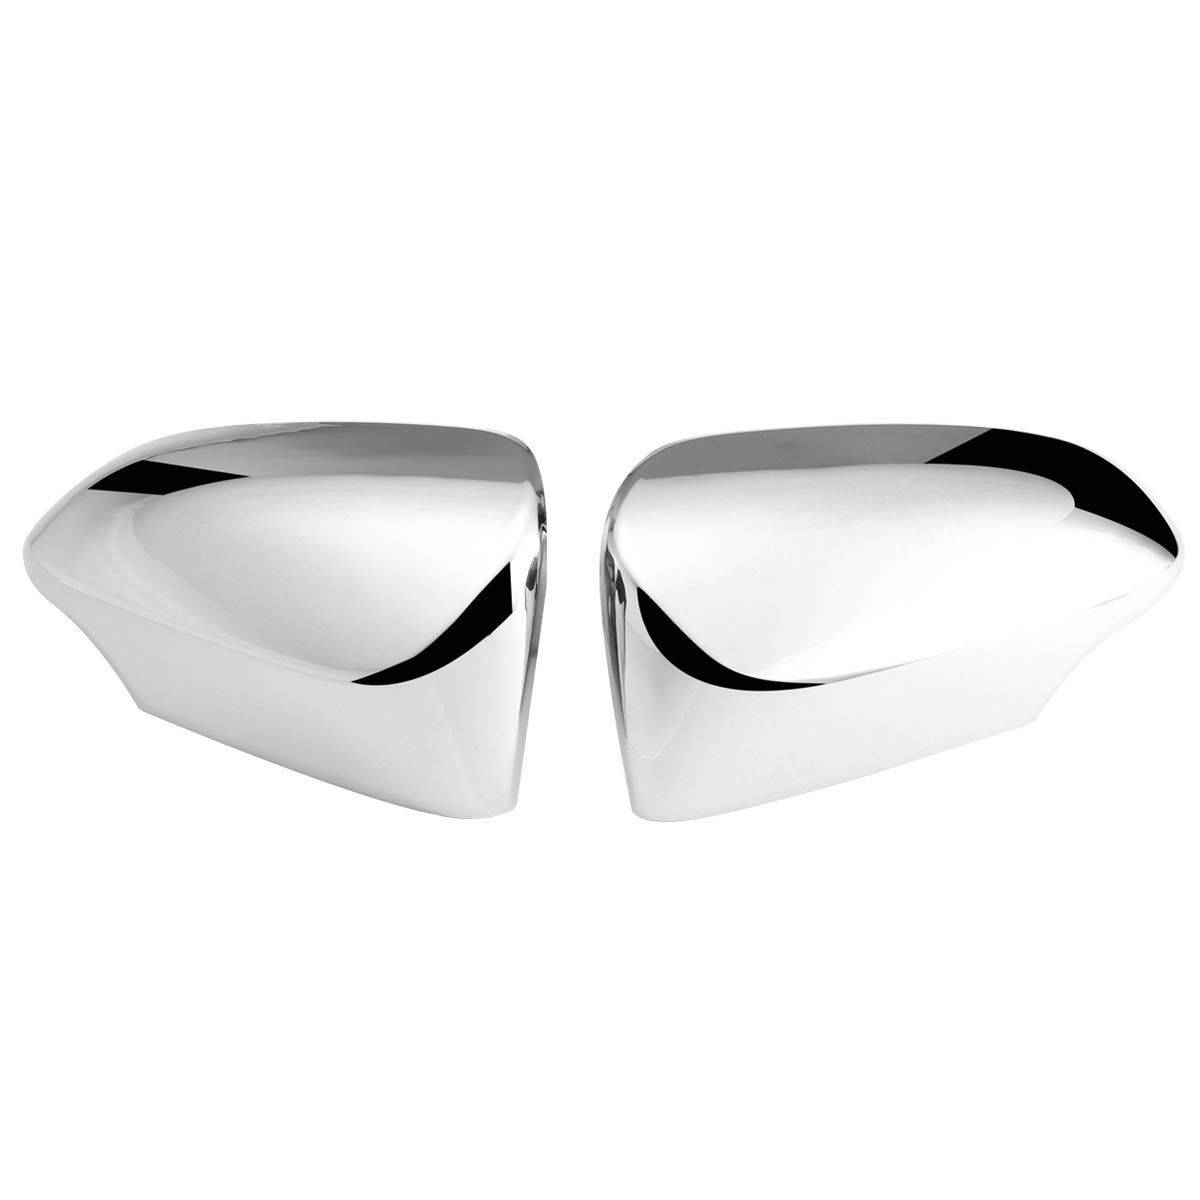 SIDE MIRROR COVERS FOR FORD FIGO (SET OF 2PCS)